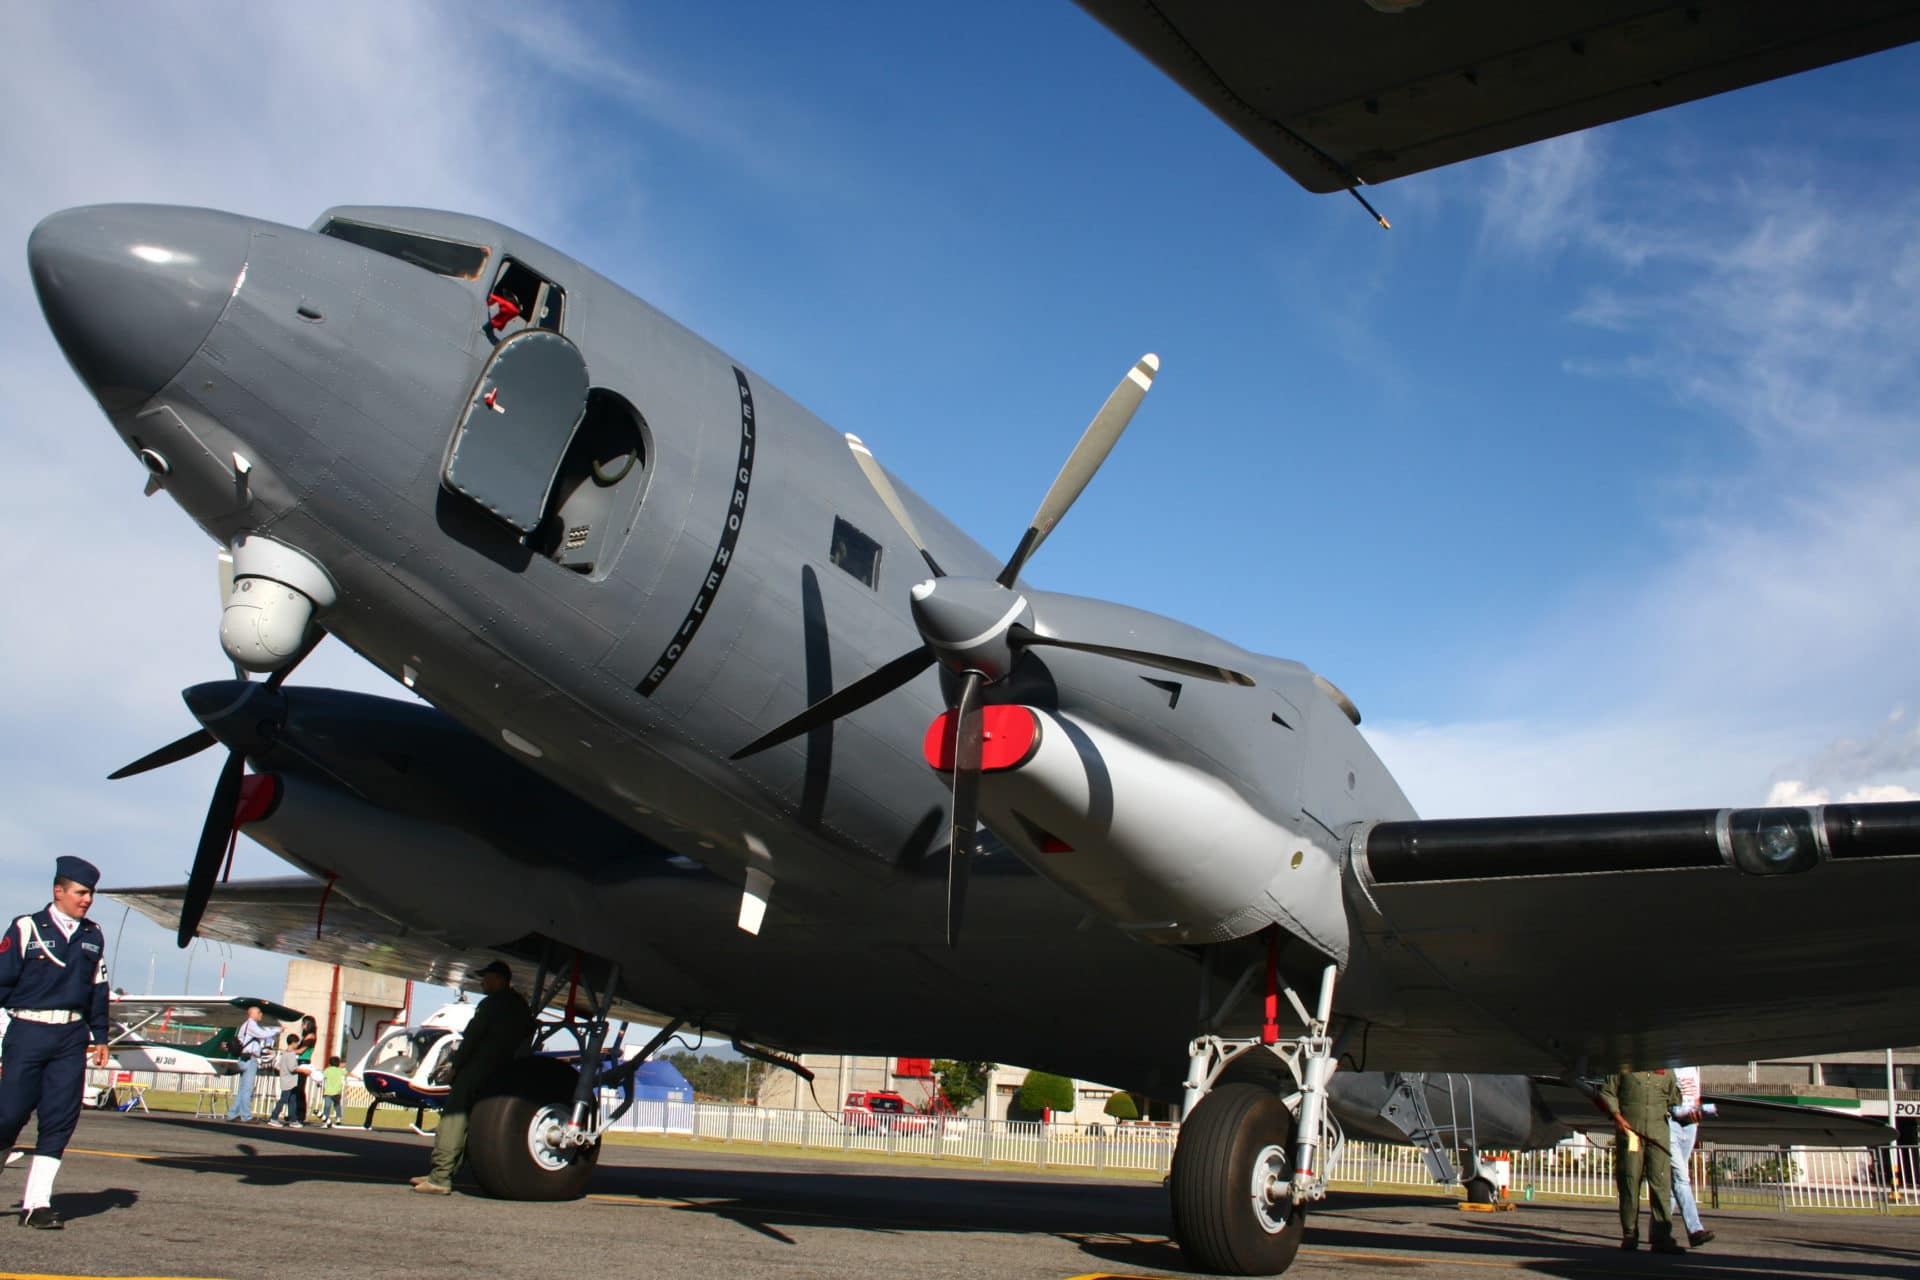 “Spooky”AC-47 in a Combat role, 80 Years after the DC-3’s Maiden flight.